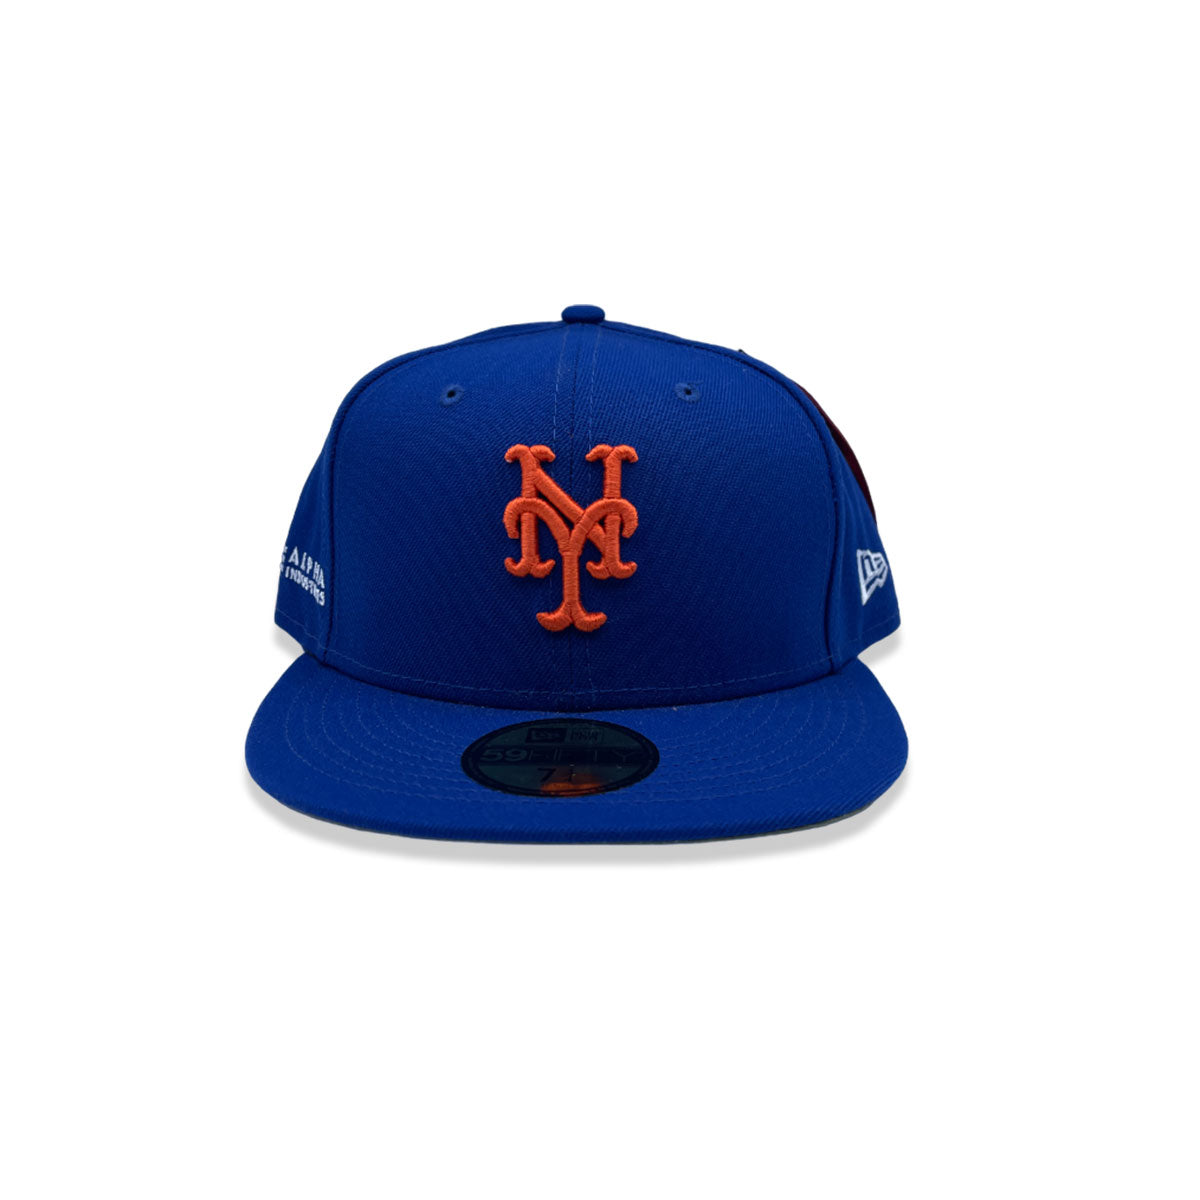 Alpha Industries x New Era 59Fifty New York Mets Fitted Hat - KickzStore